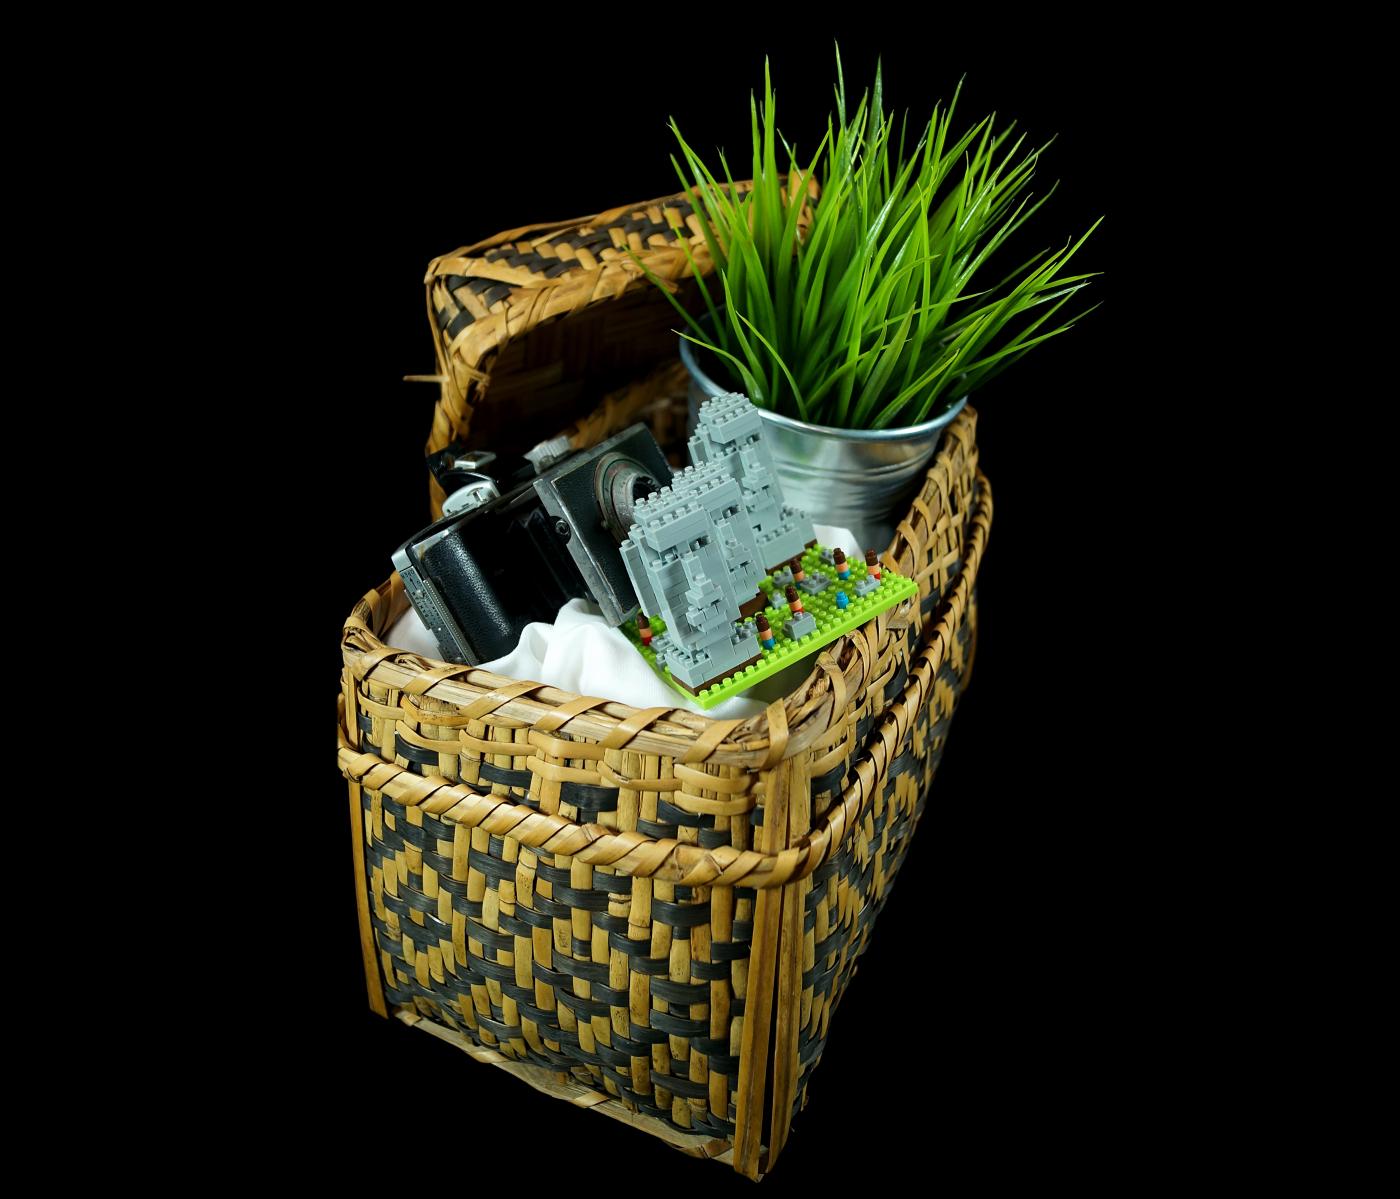 Basket filled with everyday treasures